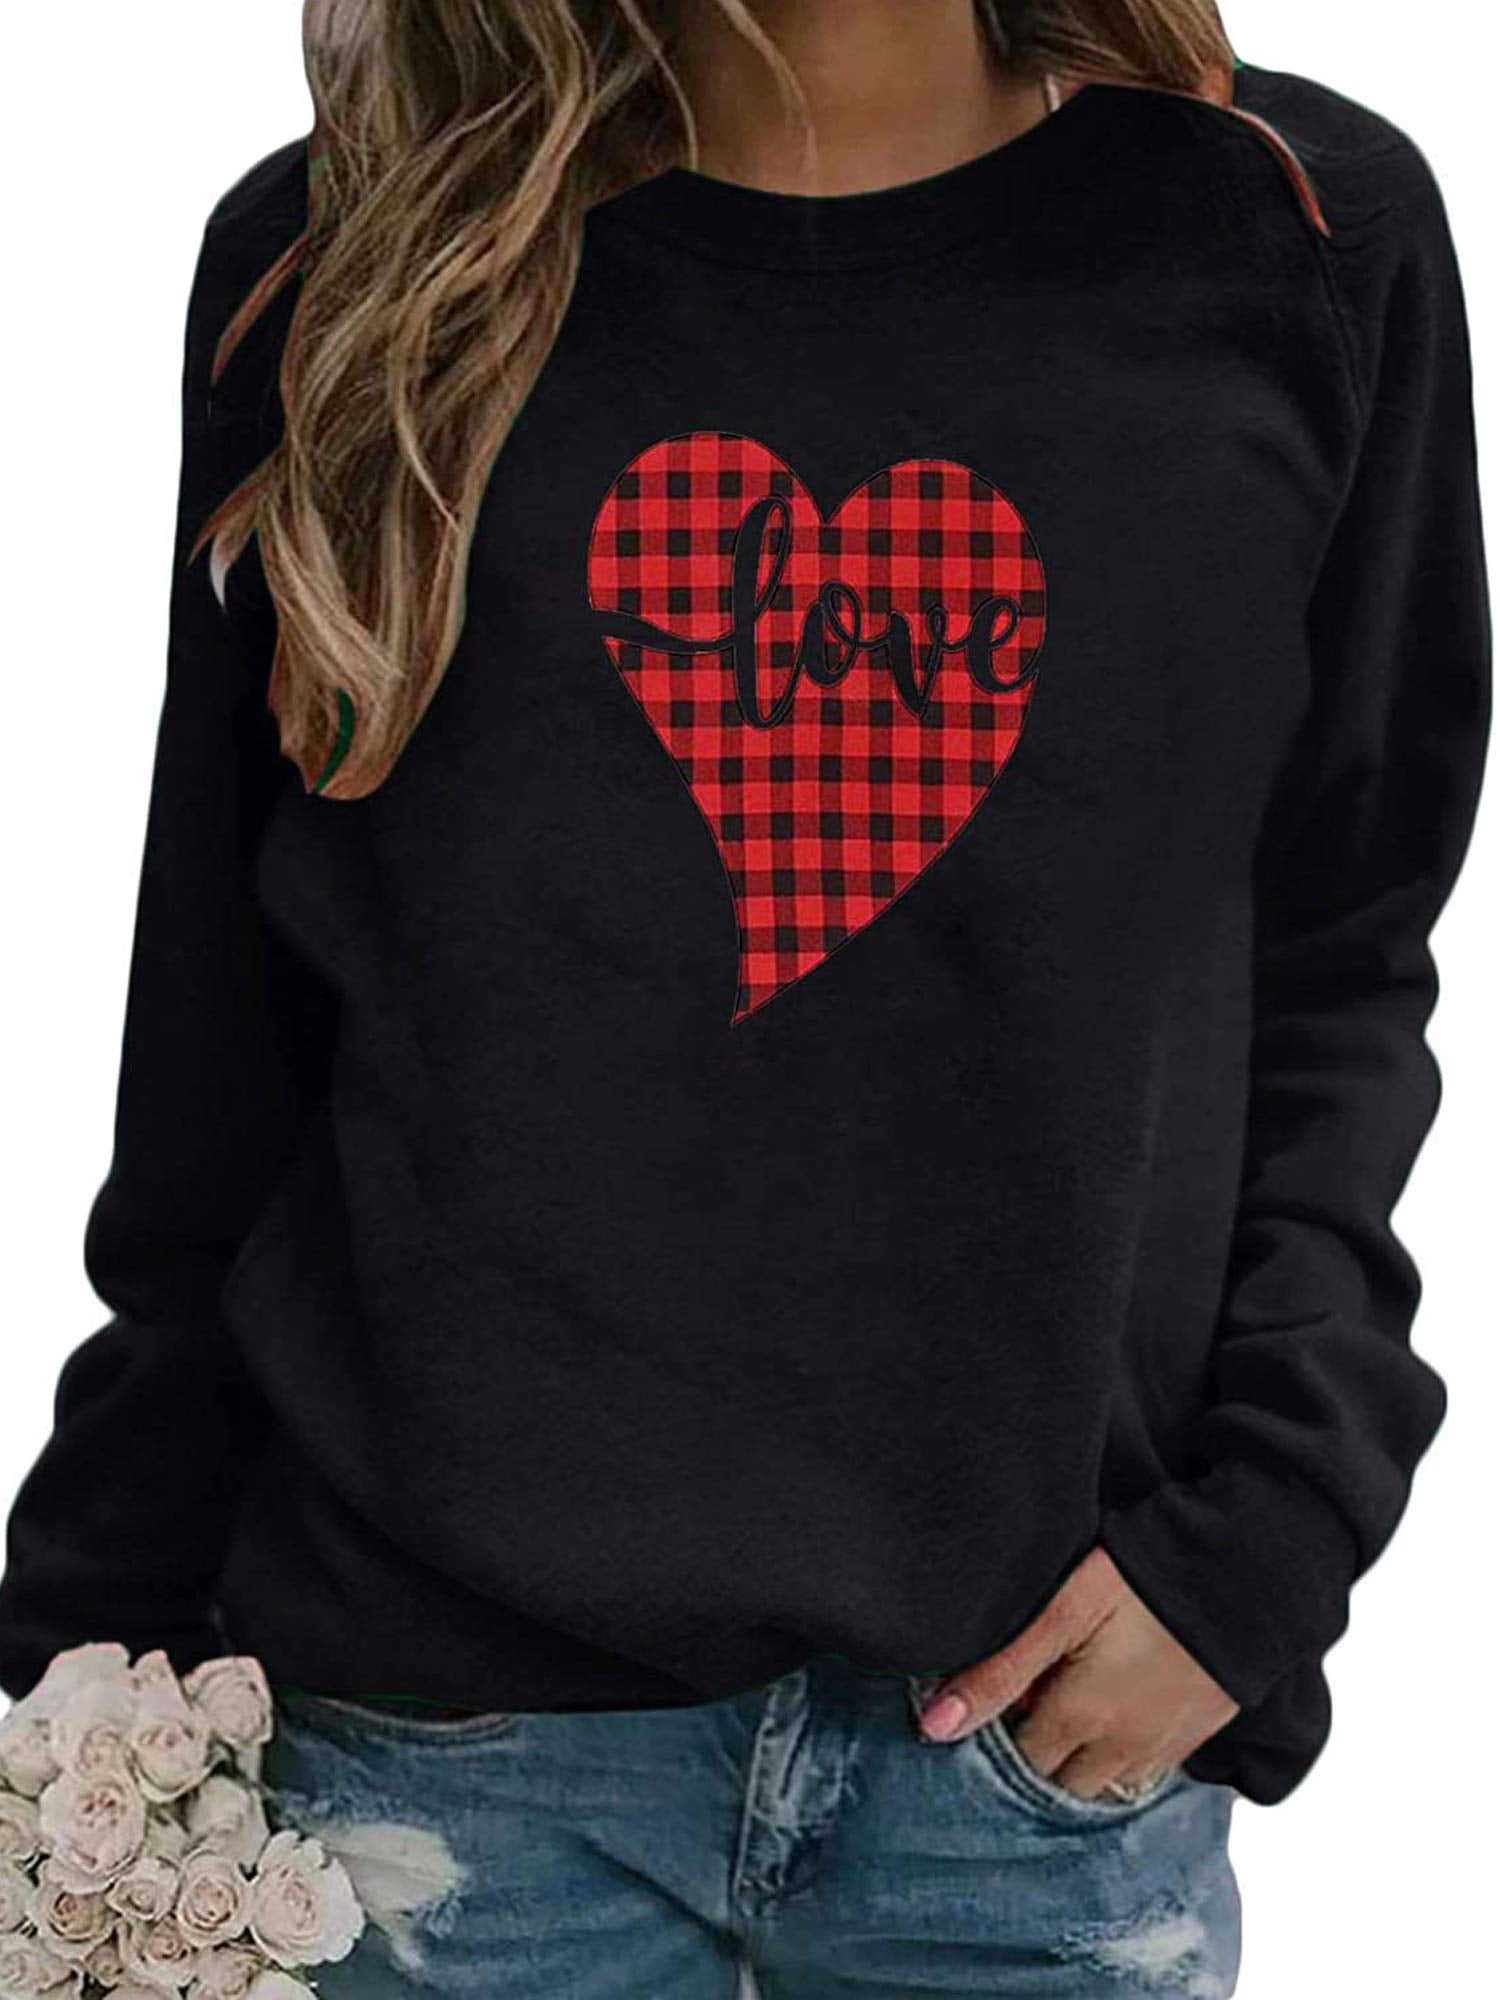 Valentines Day Shirts Women Short Sleeve & Long Sleeve Love Letter T-Shirt Tops Blouse Couple Present Gift